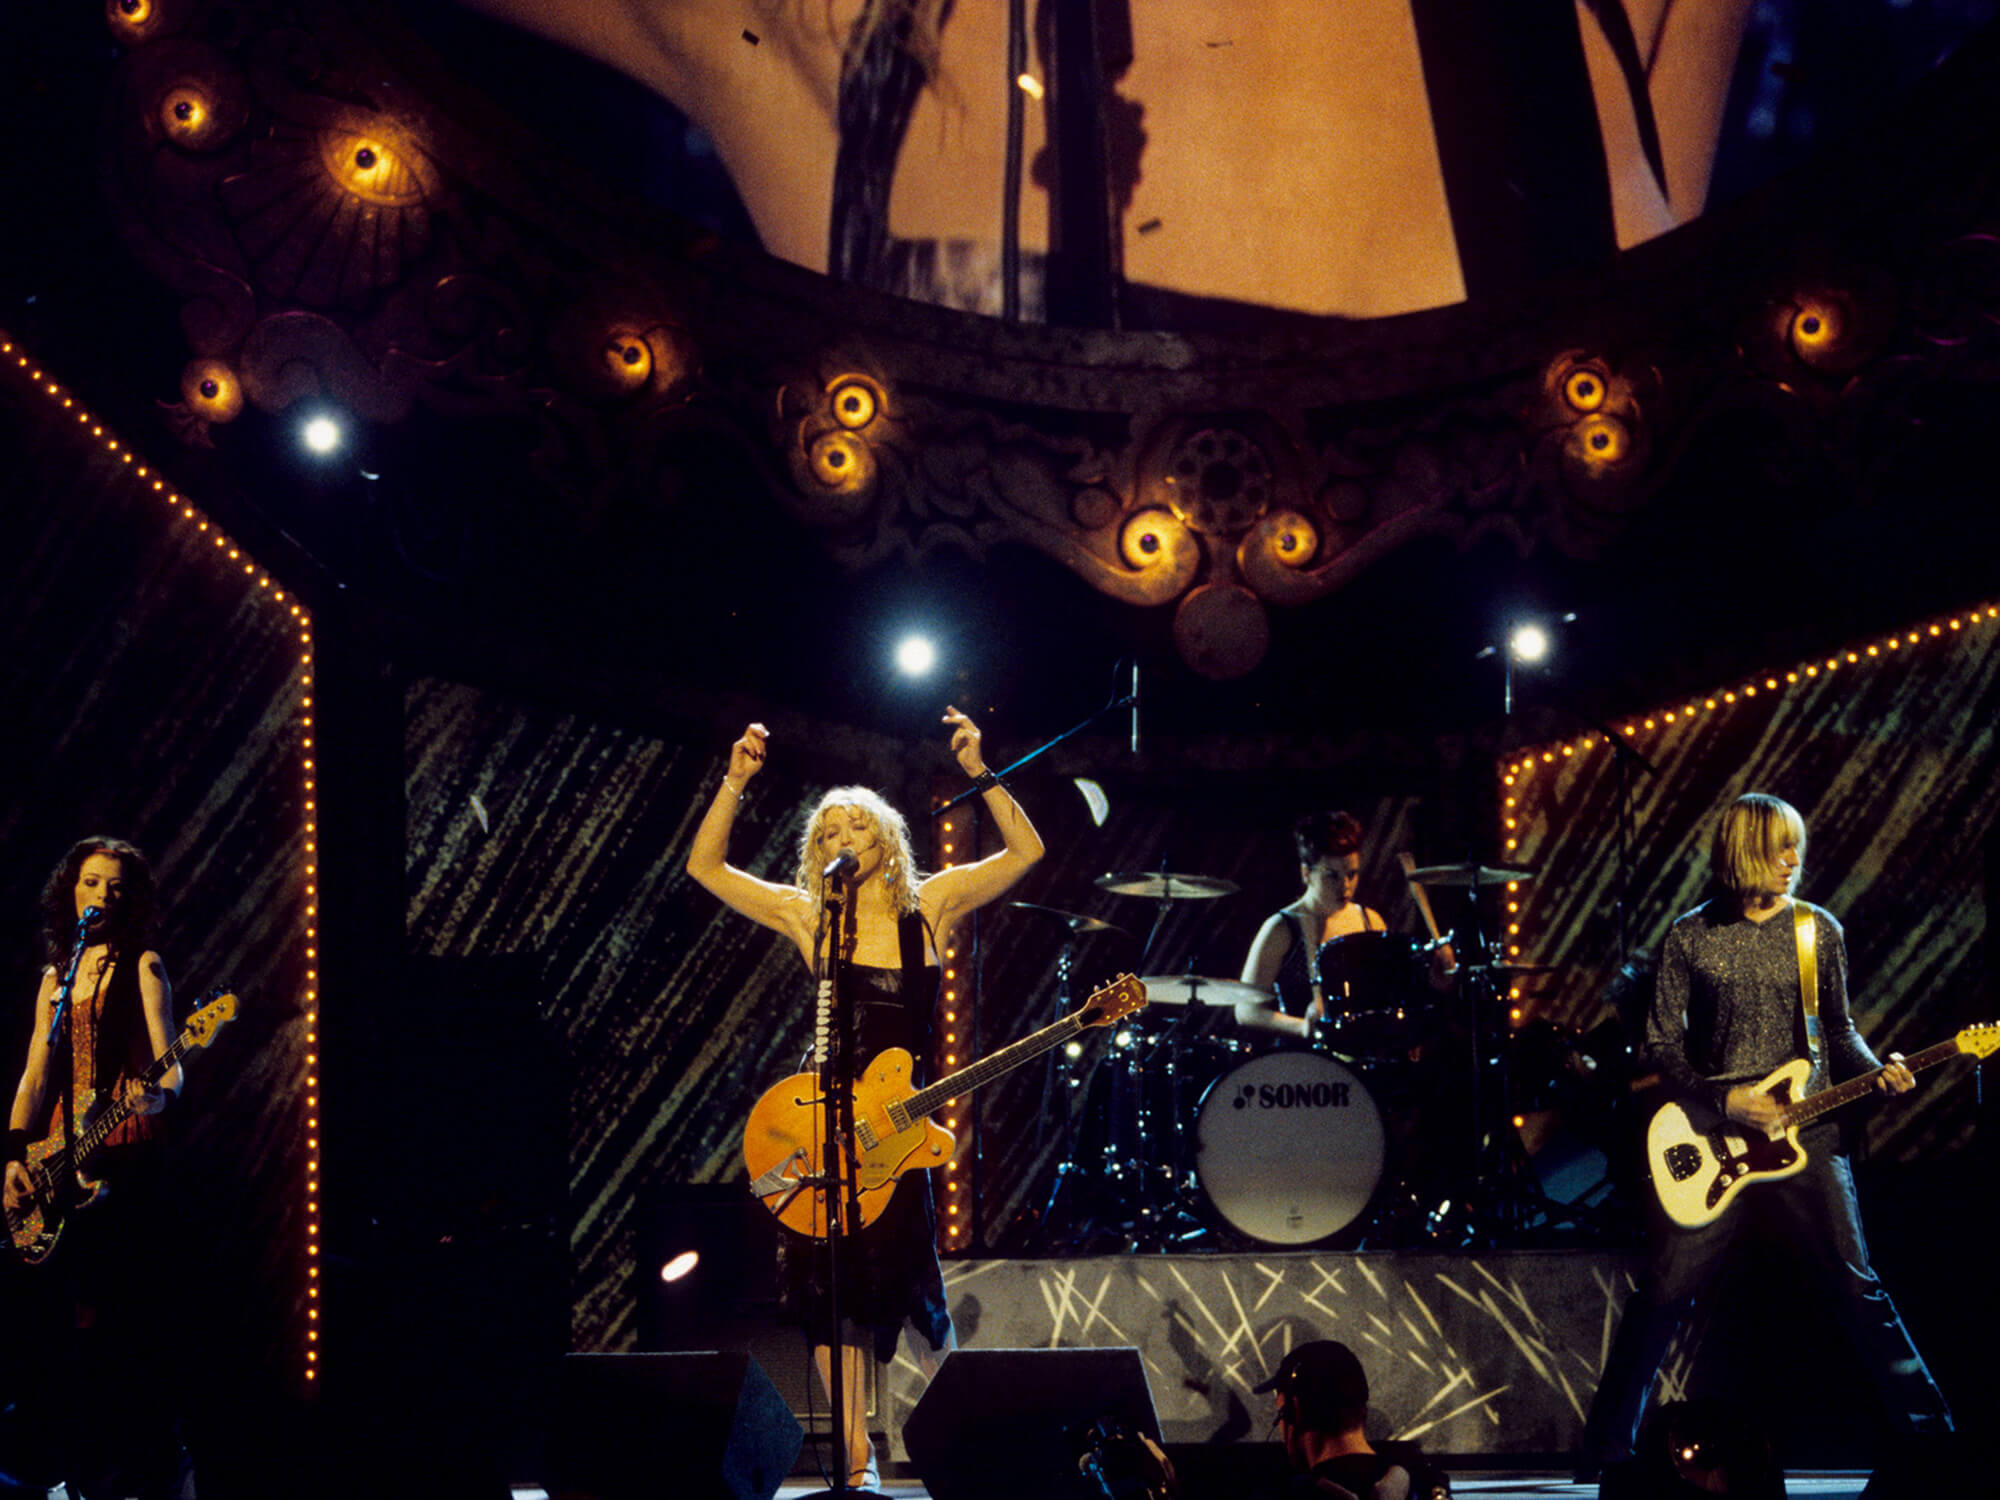 Courtney Love and performing with Hole at The 1998 Billboard Music Awards, photo by Ke.Mazur/WireImage via Getty Images